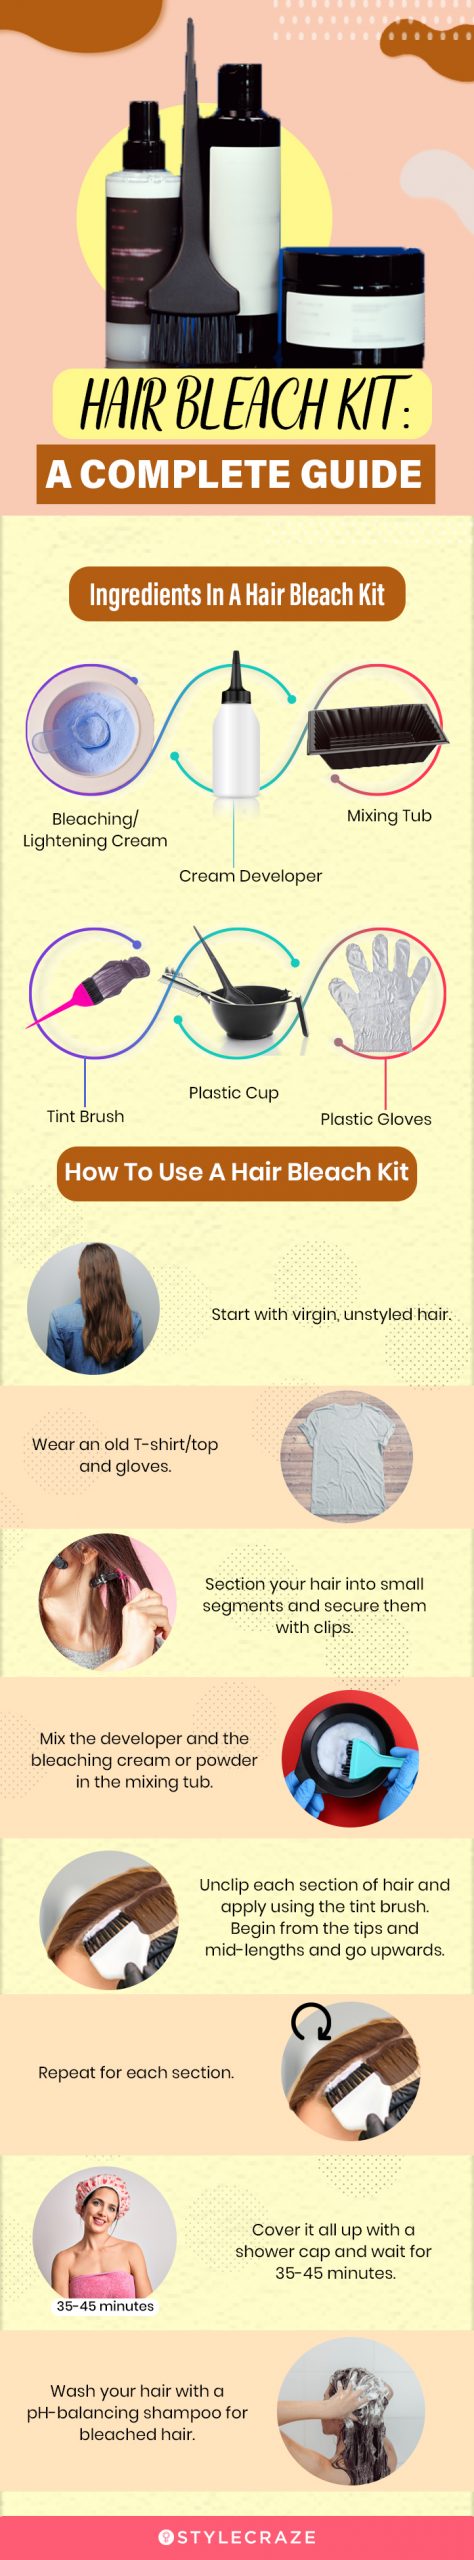 Hair Bleach Kit: A Complete Guide (infographic)